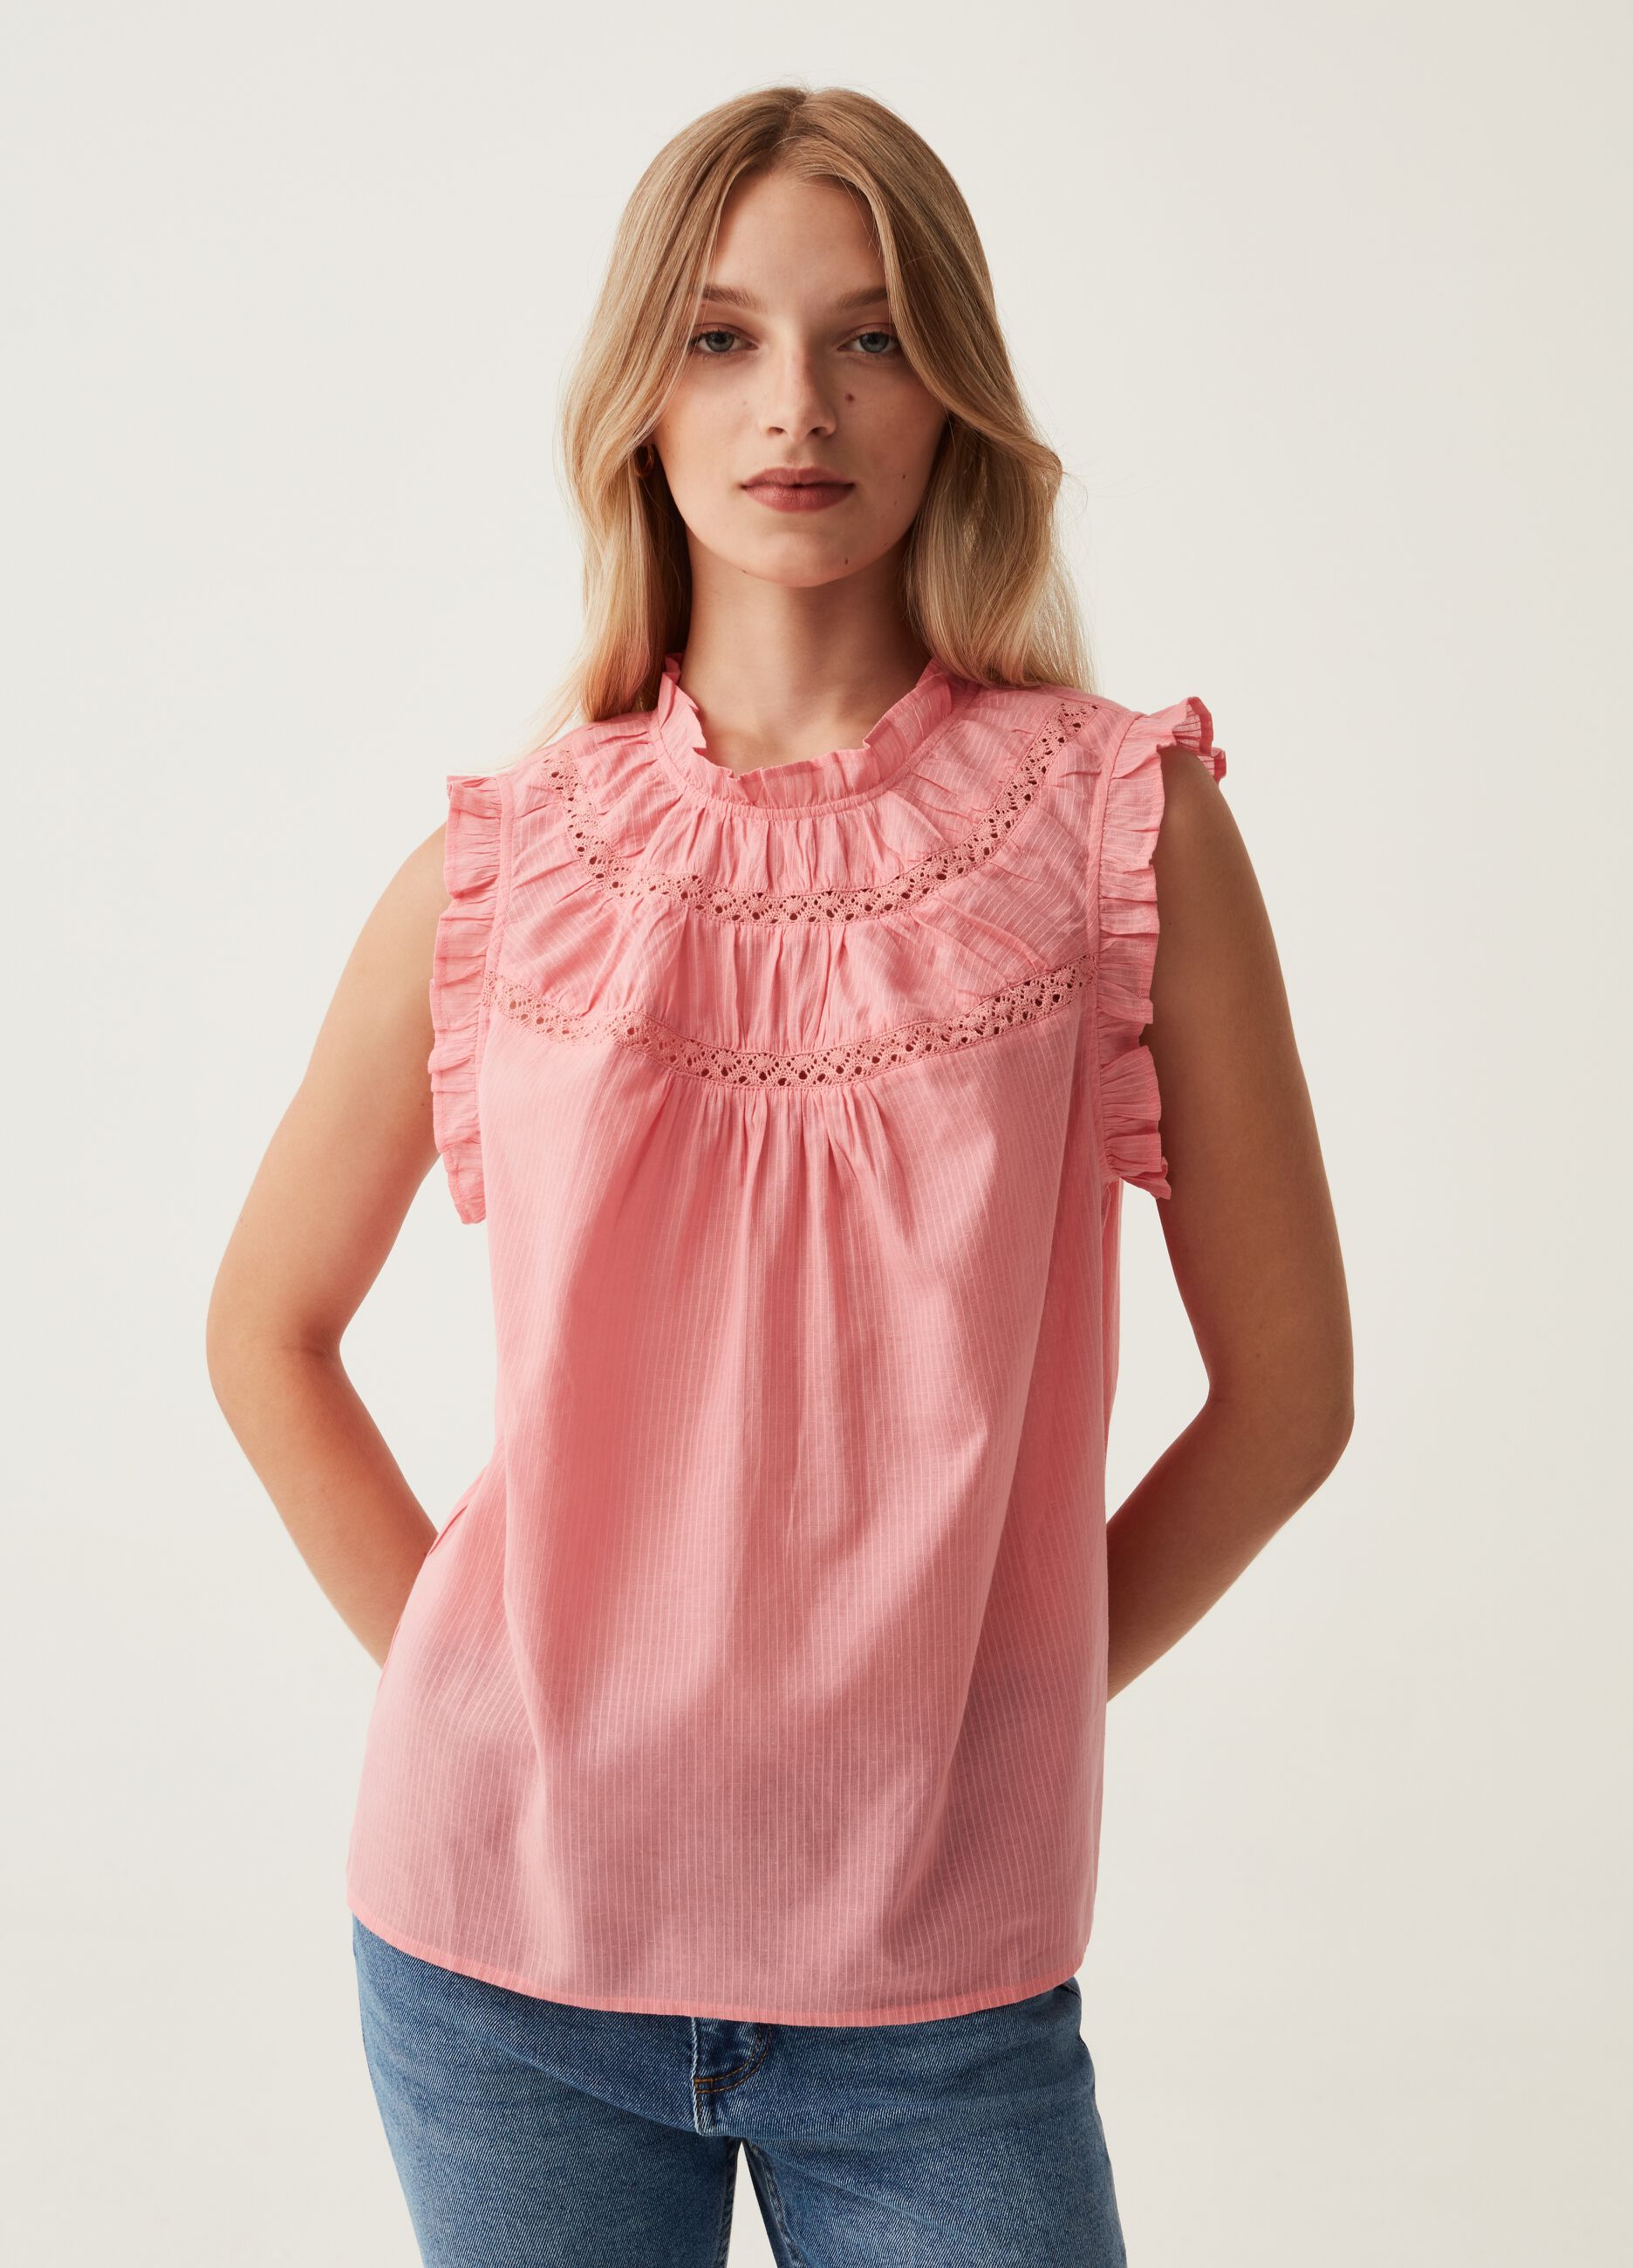 Tank top with frills and lace inserts